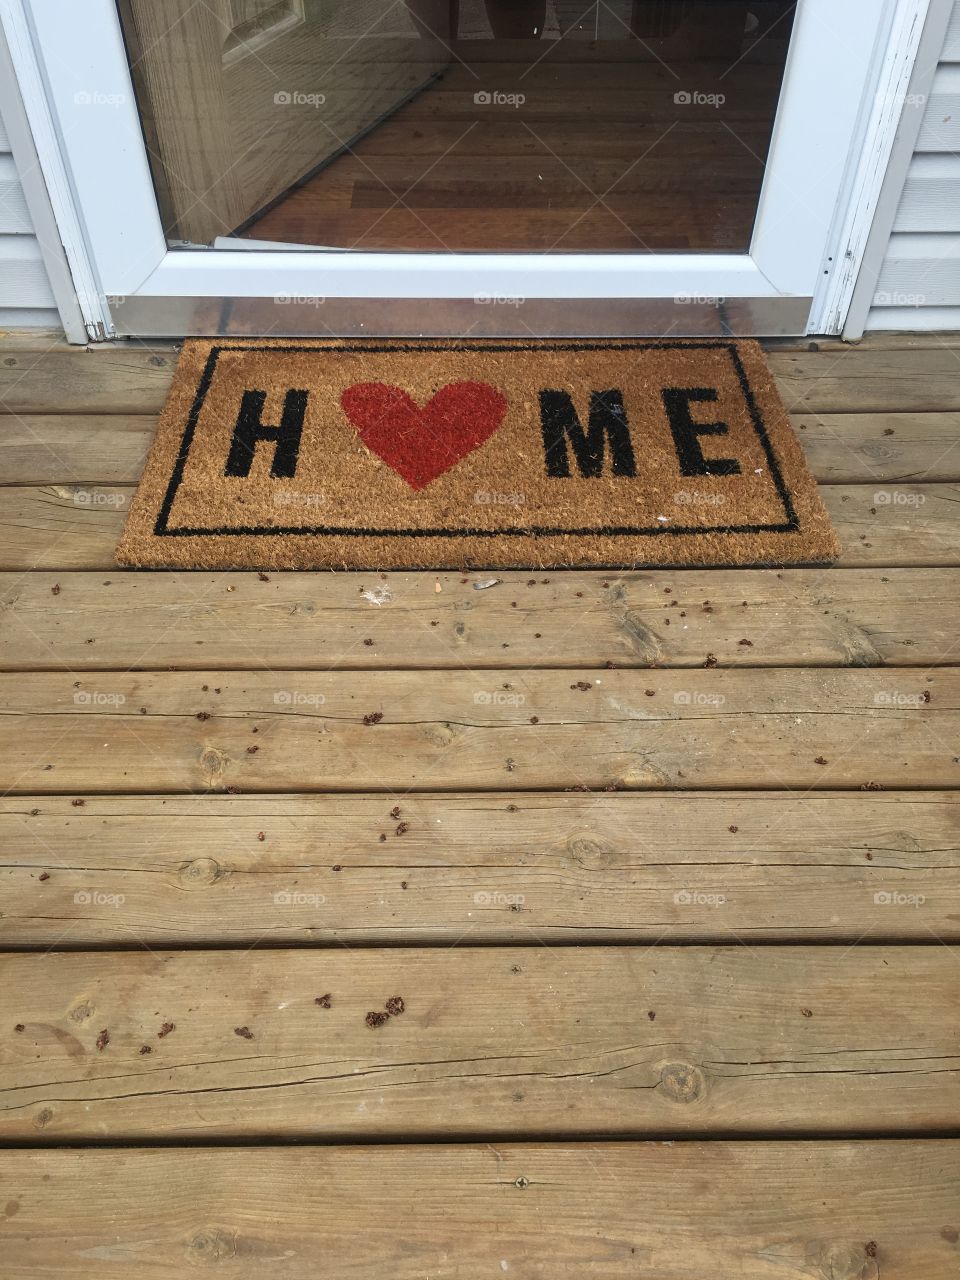 Home is where the heart is~